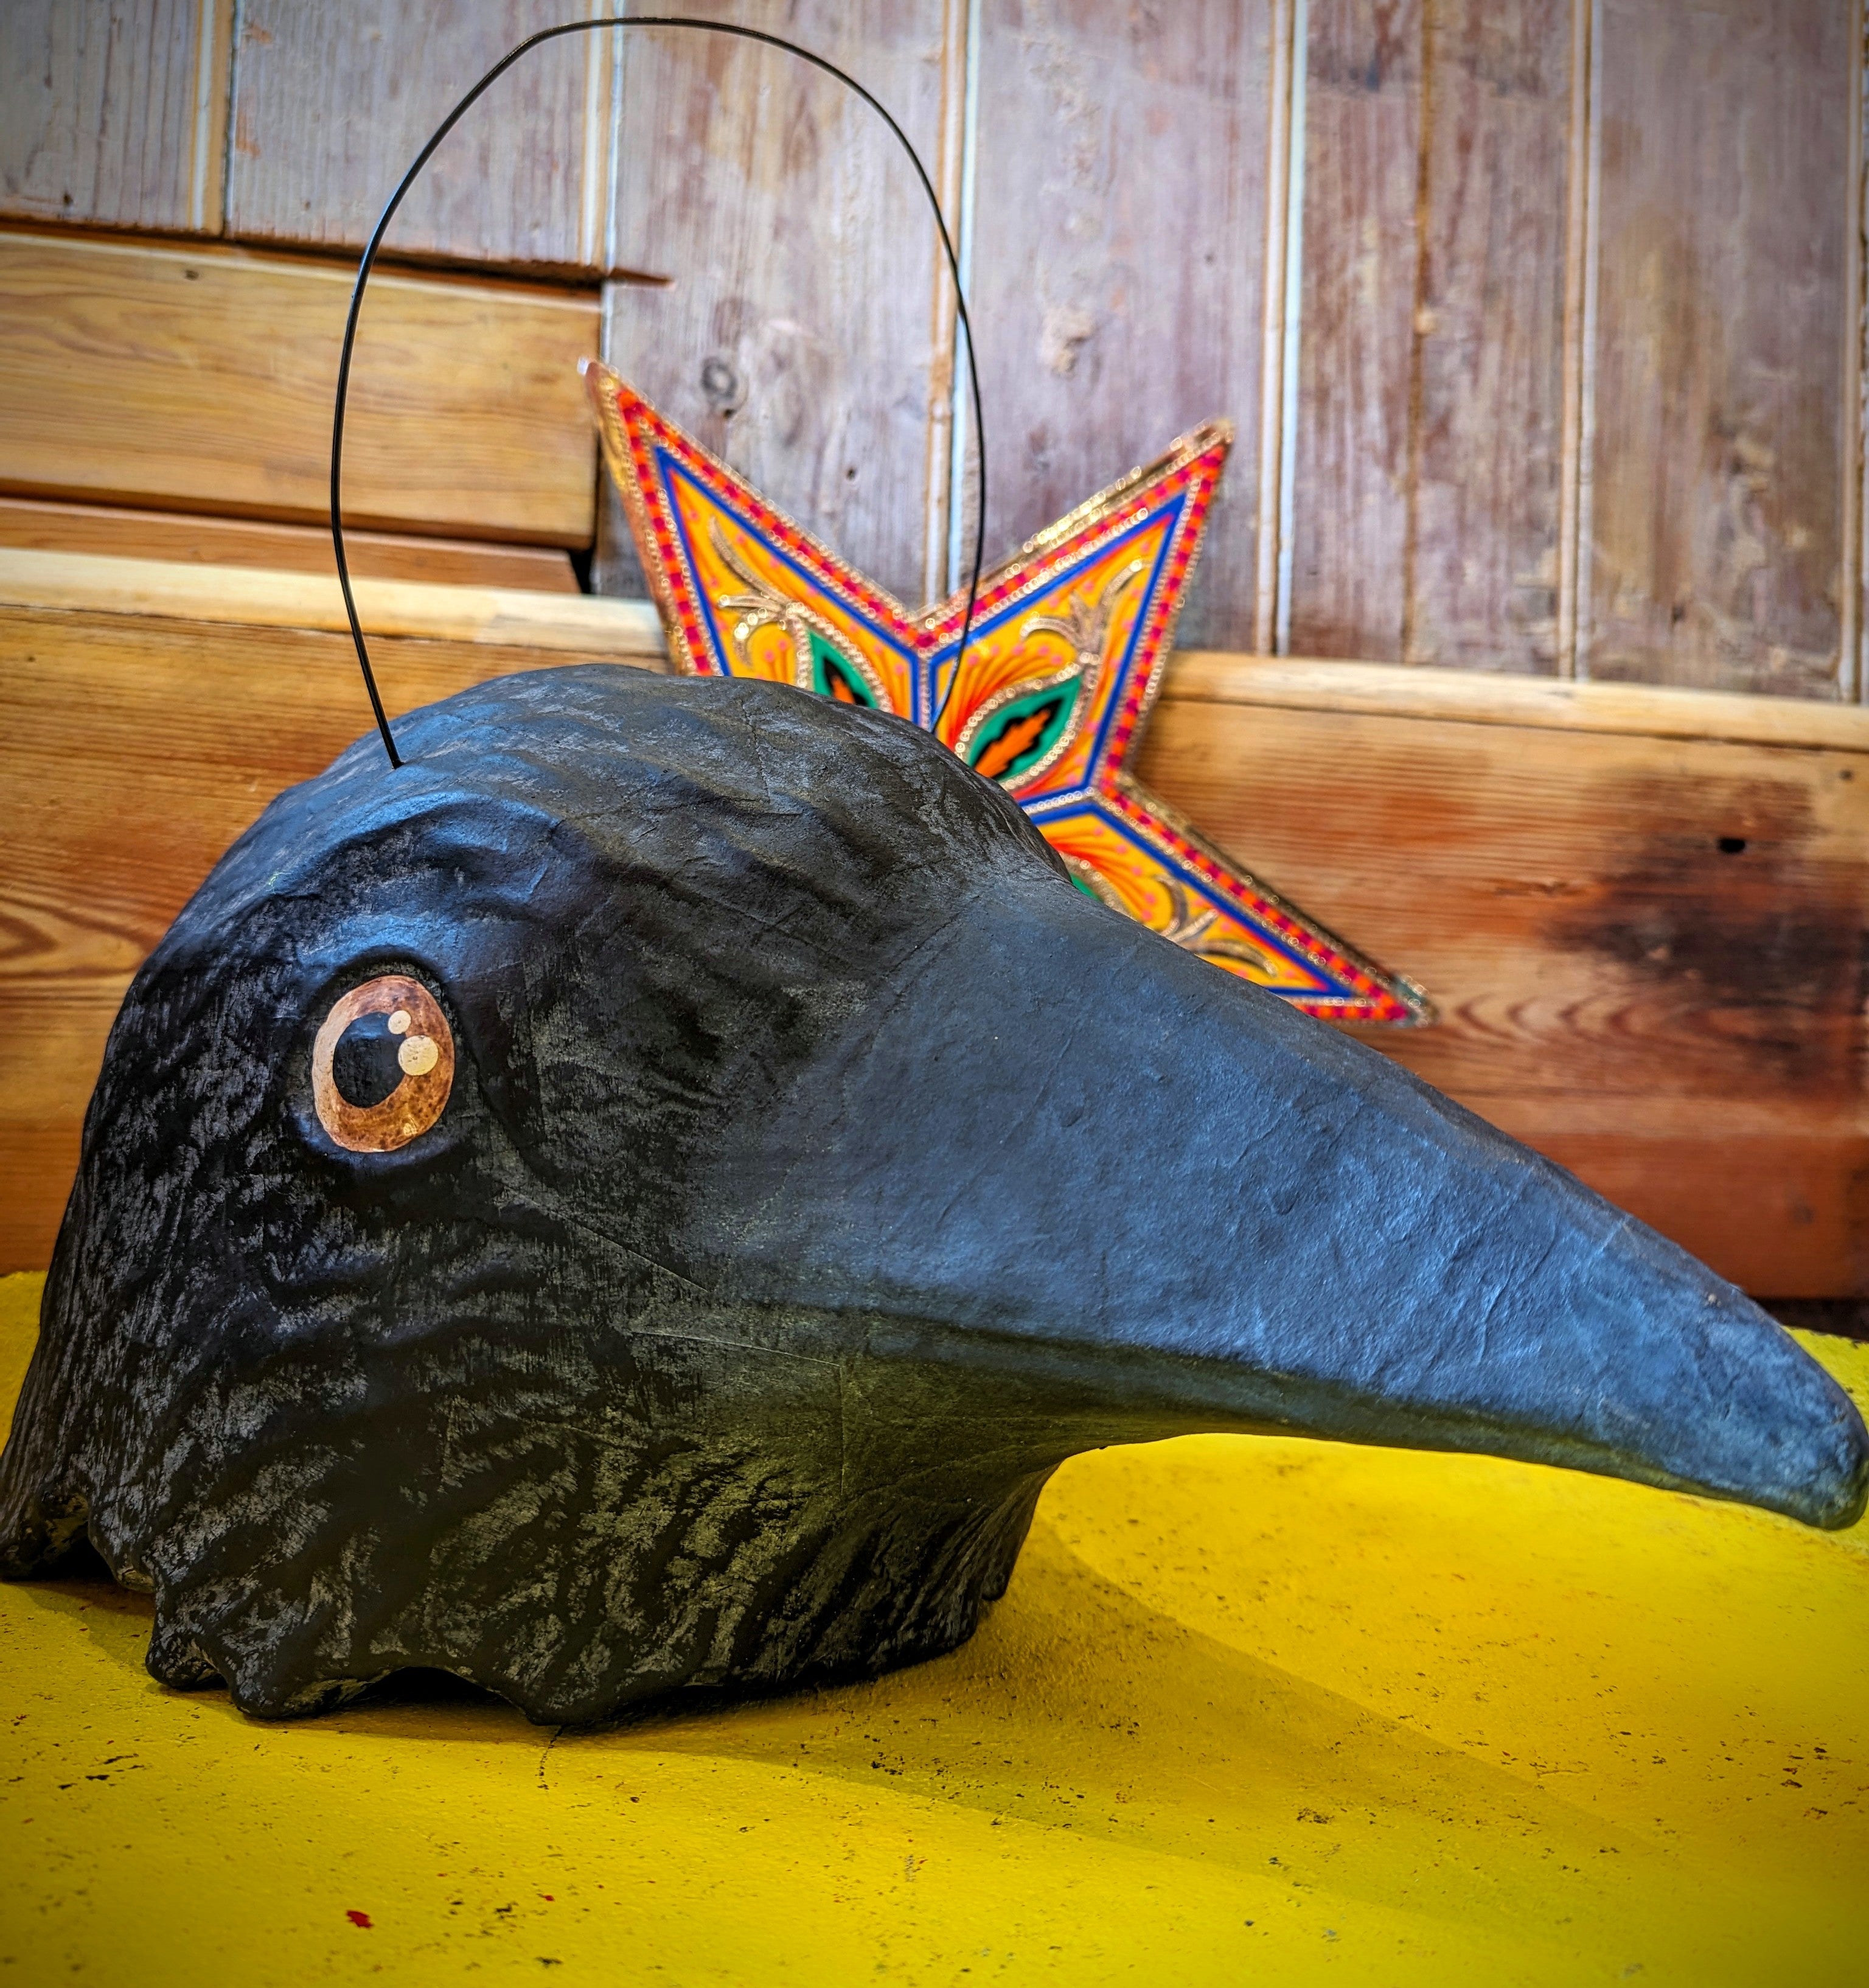 Massive ,stunning Raven American vintage style candy buckets! Gorgeously hand made and  hanpainted with a super cheeky, beady eye!...this candy bucket would make a fantastic decoration indoors all year round!, embrace the dark side!!

Handmade in the Philippines

Wire, paper mache, plaster

